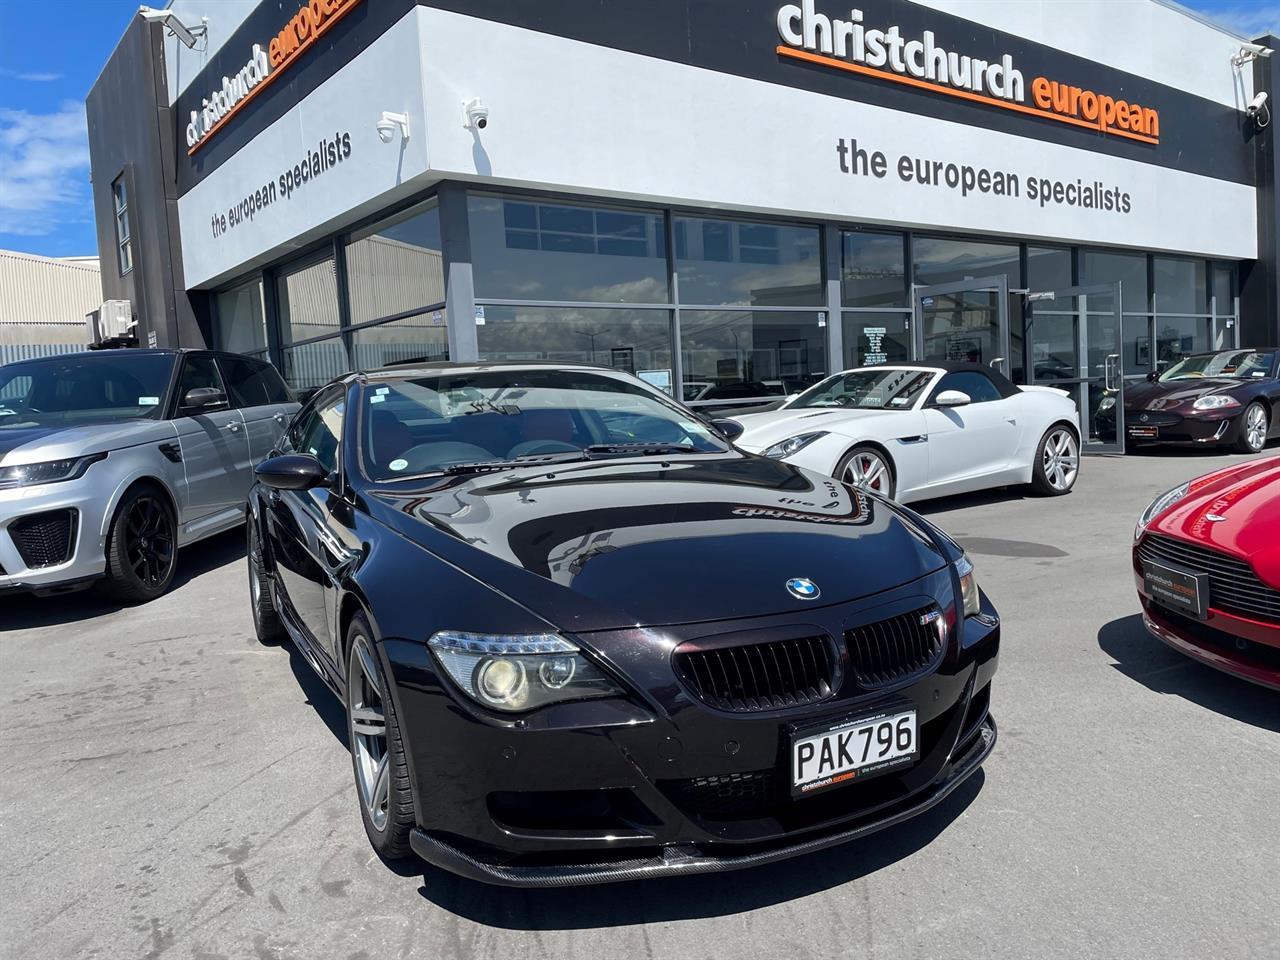 image-1, 2006 BMW M6 5.0 V10 SMG Coupe Carbon Package at Christchurch